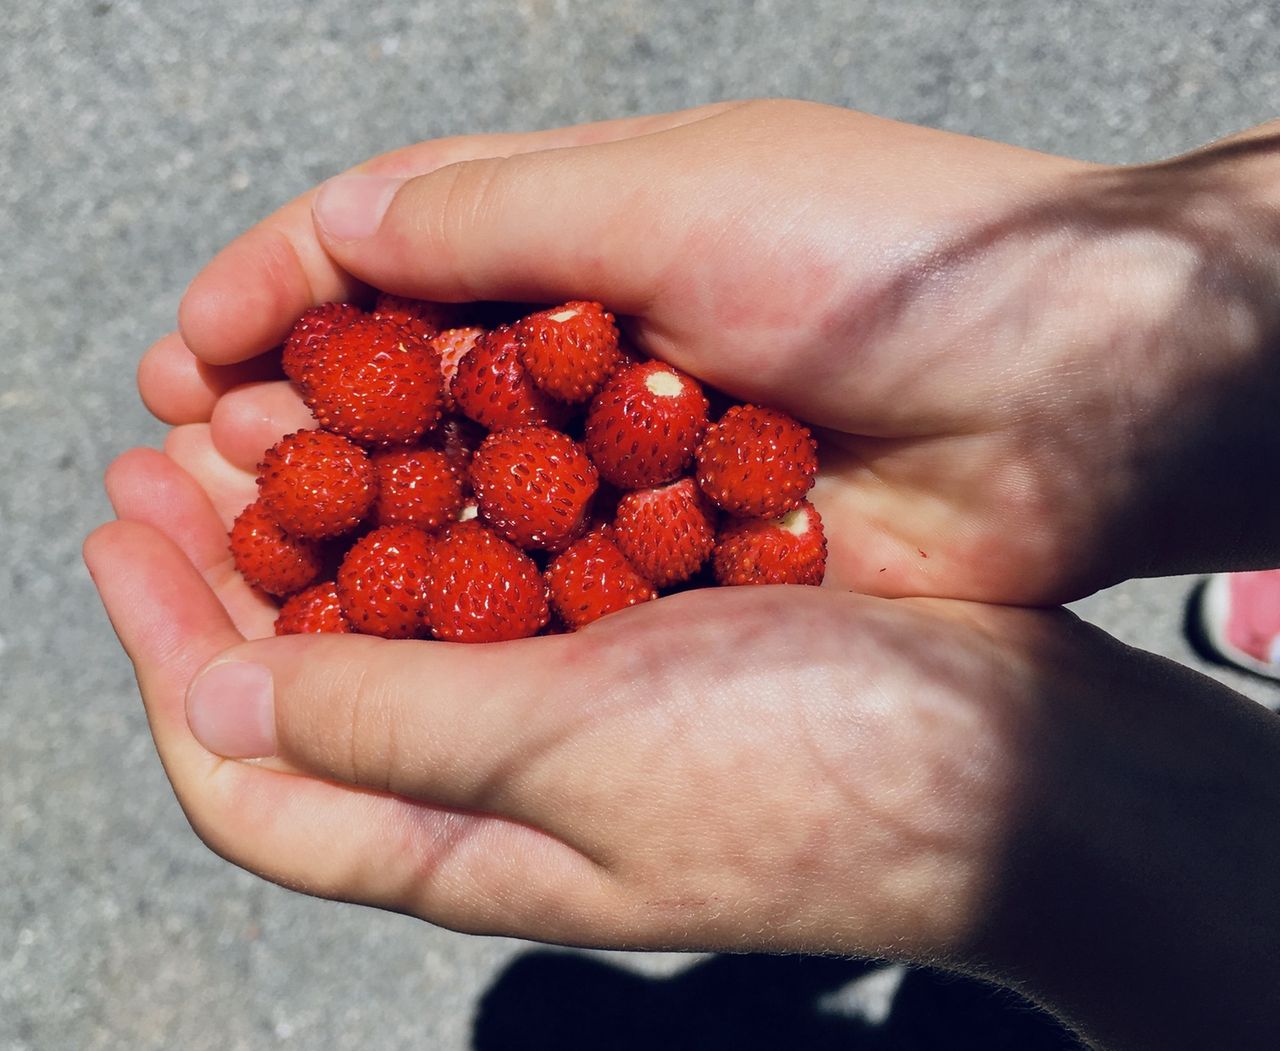 The season for wild strawberries is ongoing, don't miss it!